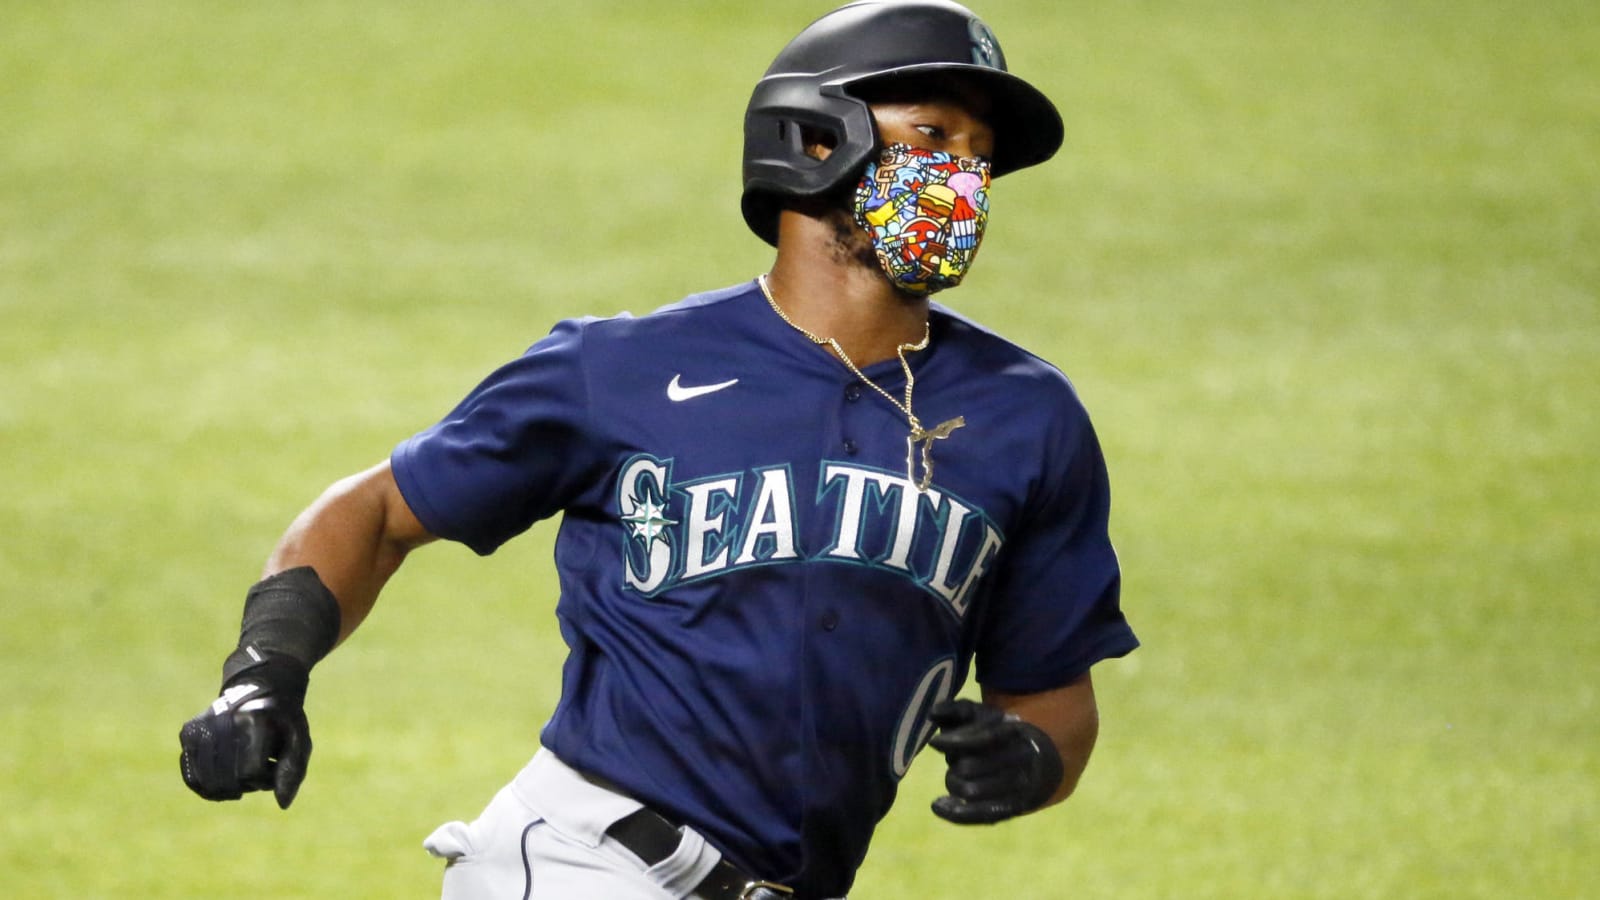 Mariners option Mallex Smith, transfer Tom Murphy to 45-day injured list